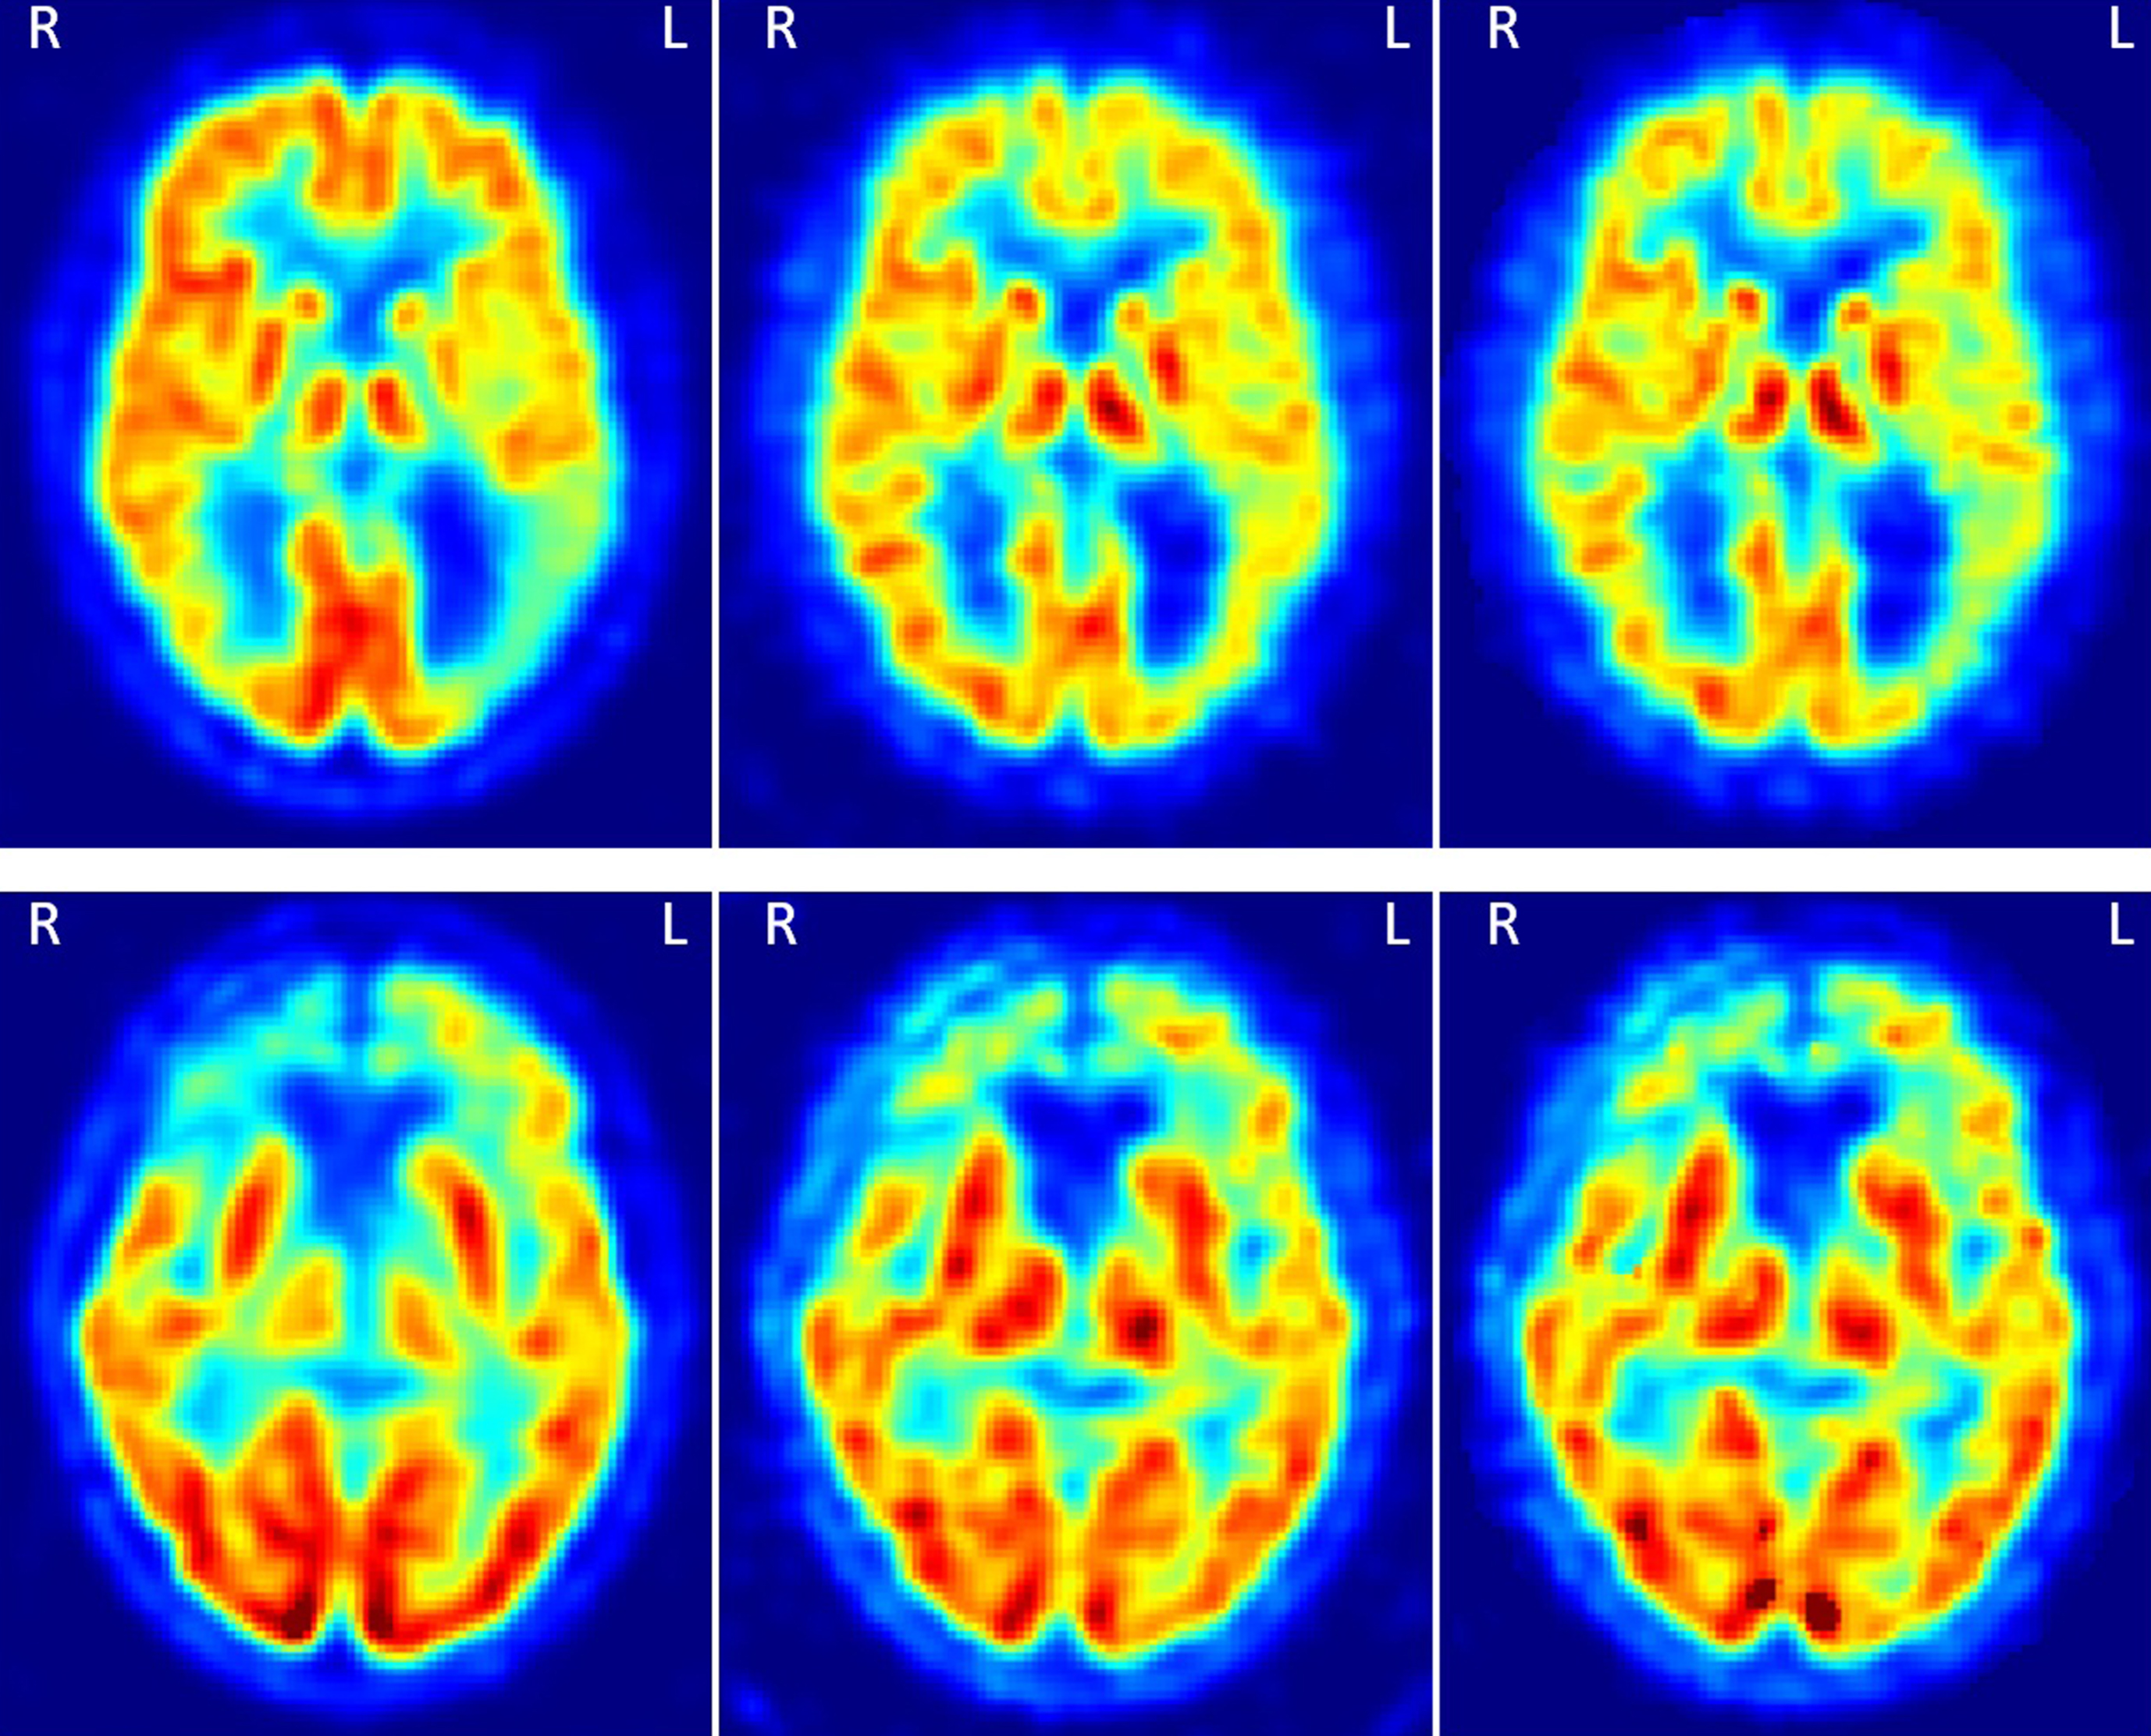 Two examples of the FDG, pPiB(1– 8min), and R1(MRTM) images, respectively from the left to the right. The images on the top are from a patient with AD, and on the bottom from a patient with FTD. In the top there is an asymmetric uptake in the parietal cortex and on the bottom an asymmetric uptake in the frontal cortex. These patterns can be seen in the three types of images.